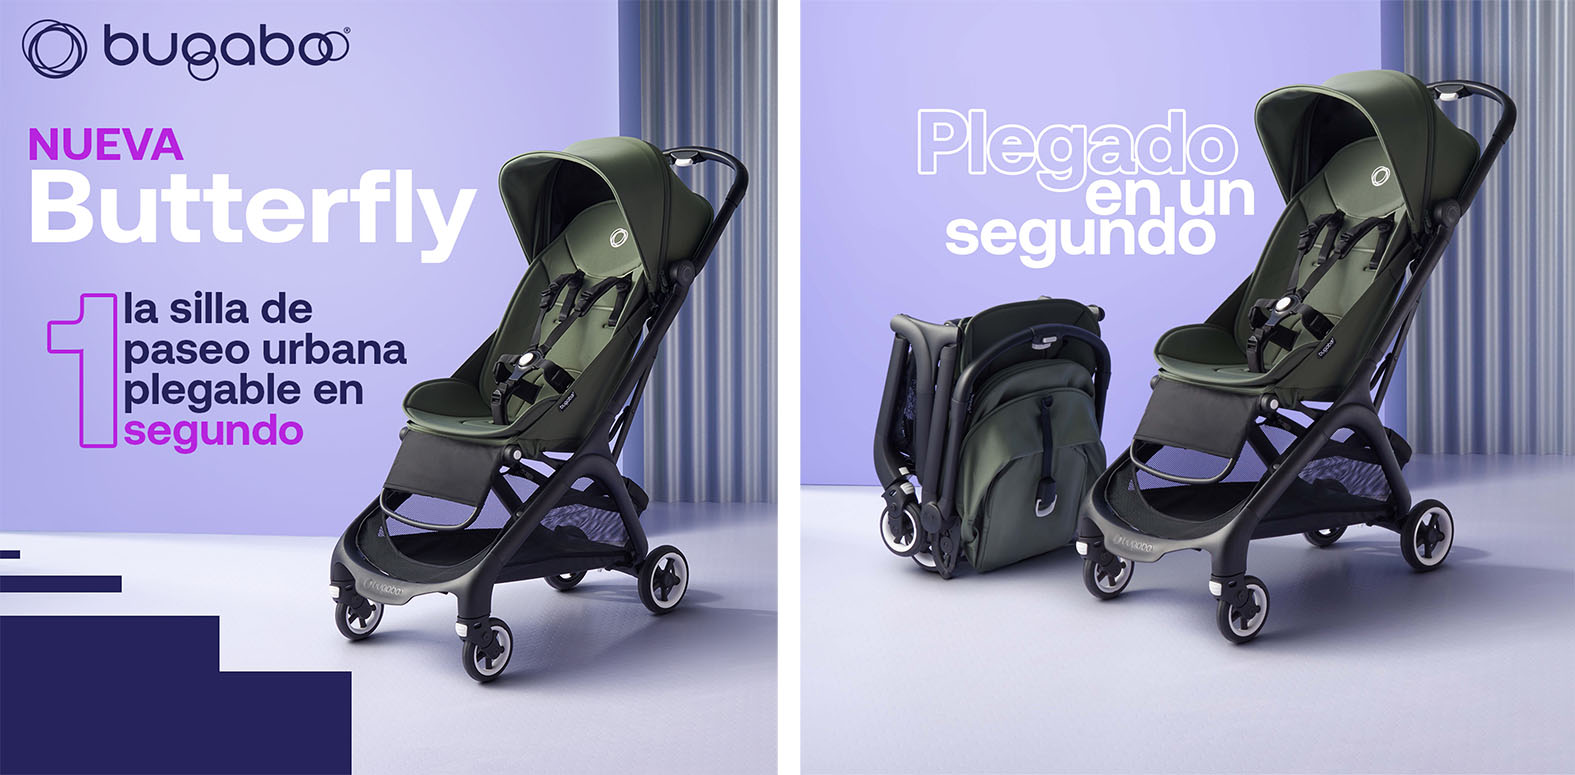 bugaboo-butterfly-puntos-clave-1.jpg